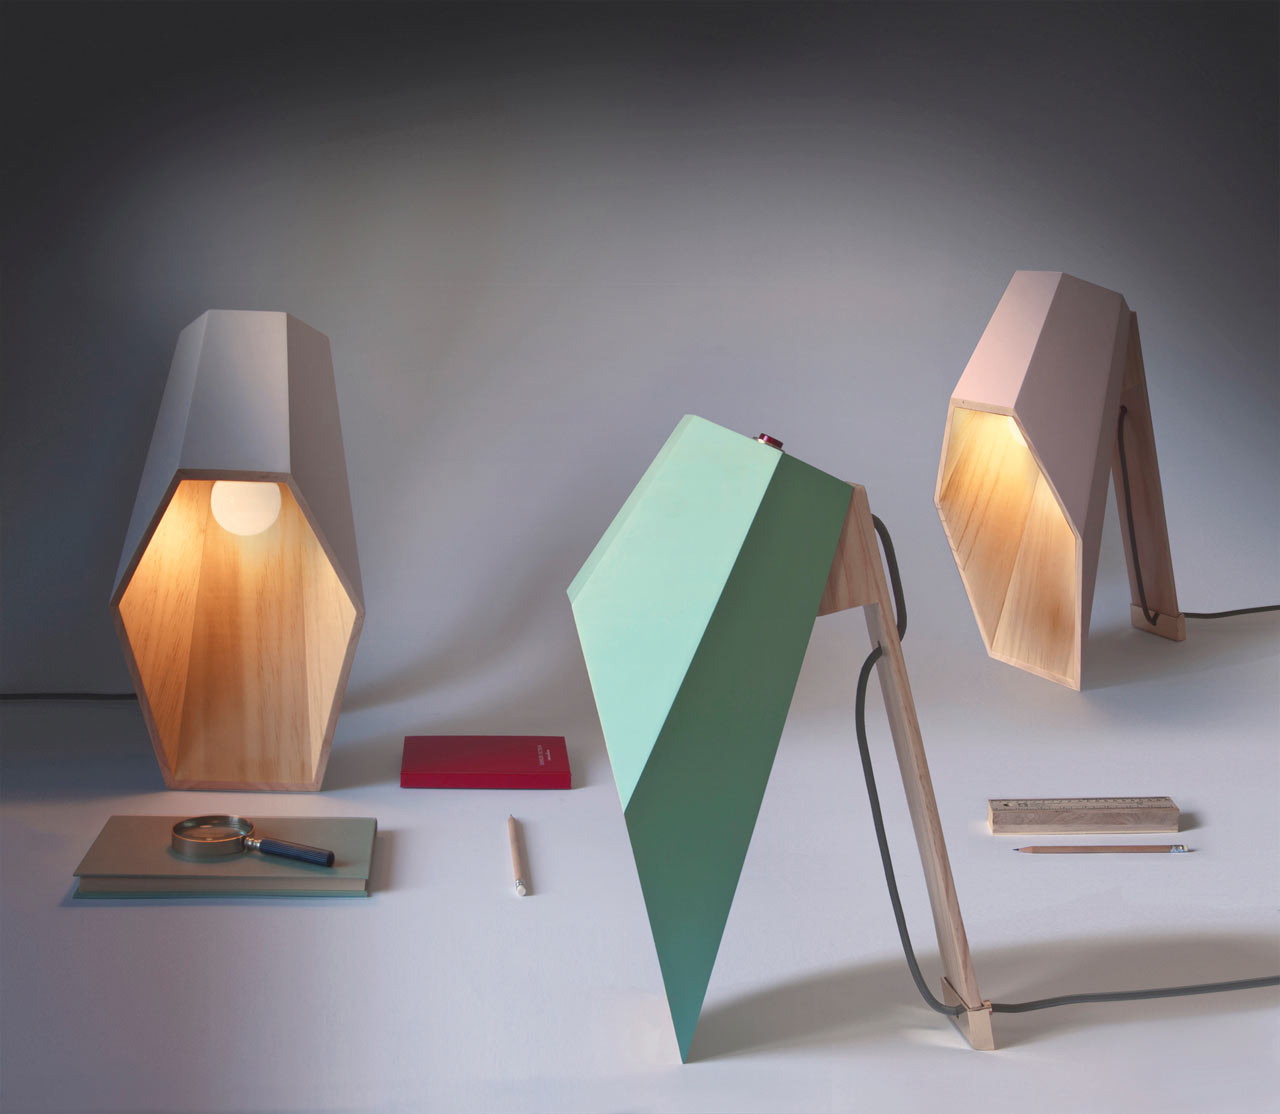 Woodspot: A Lamp with an Unusual Profile